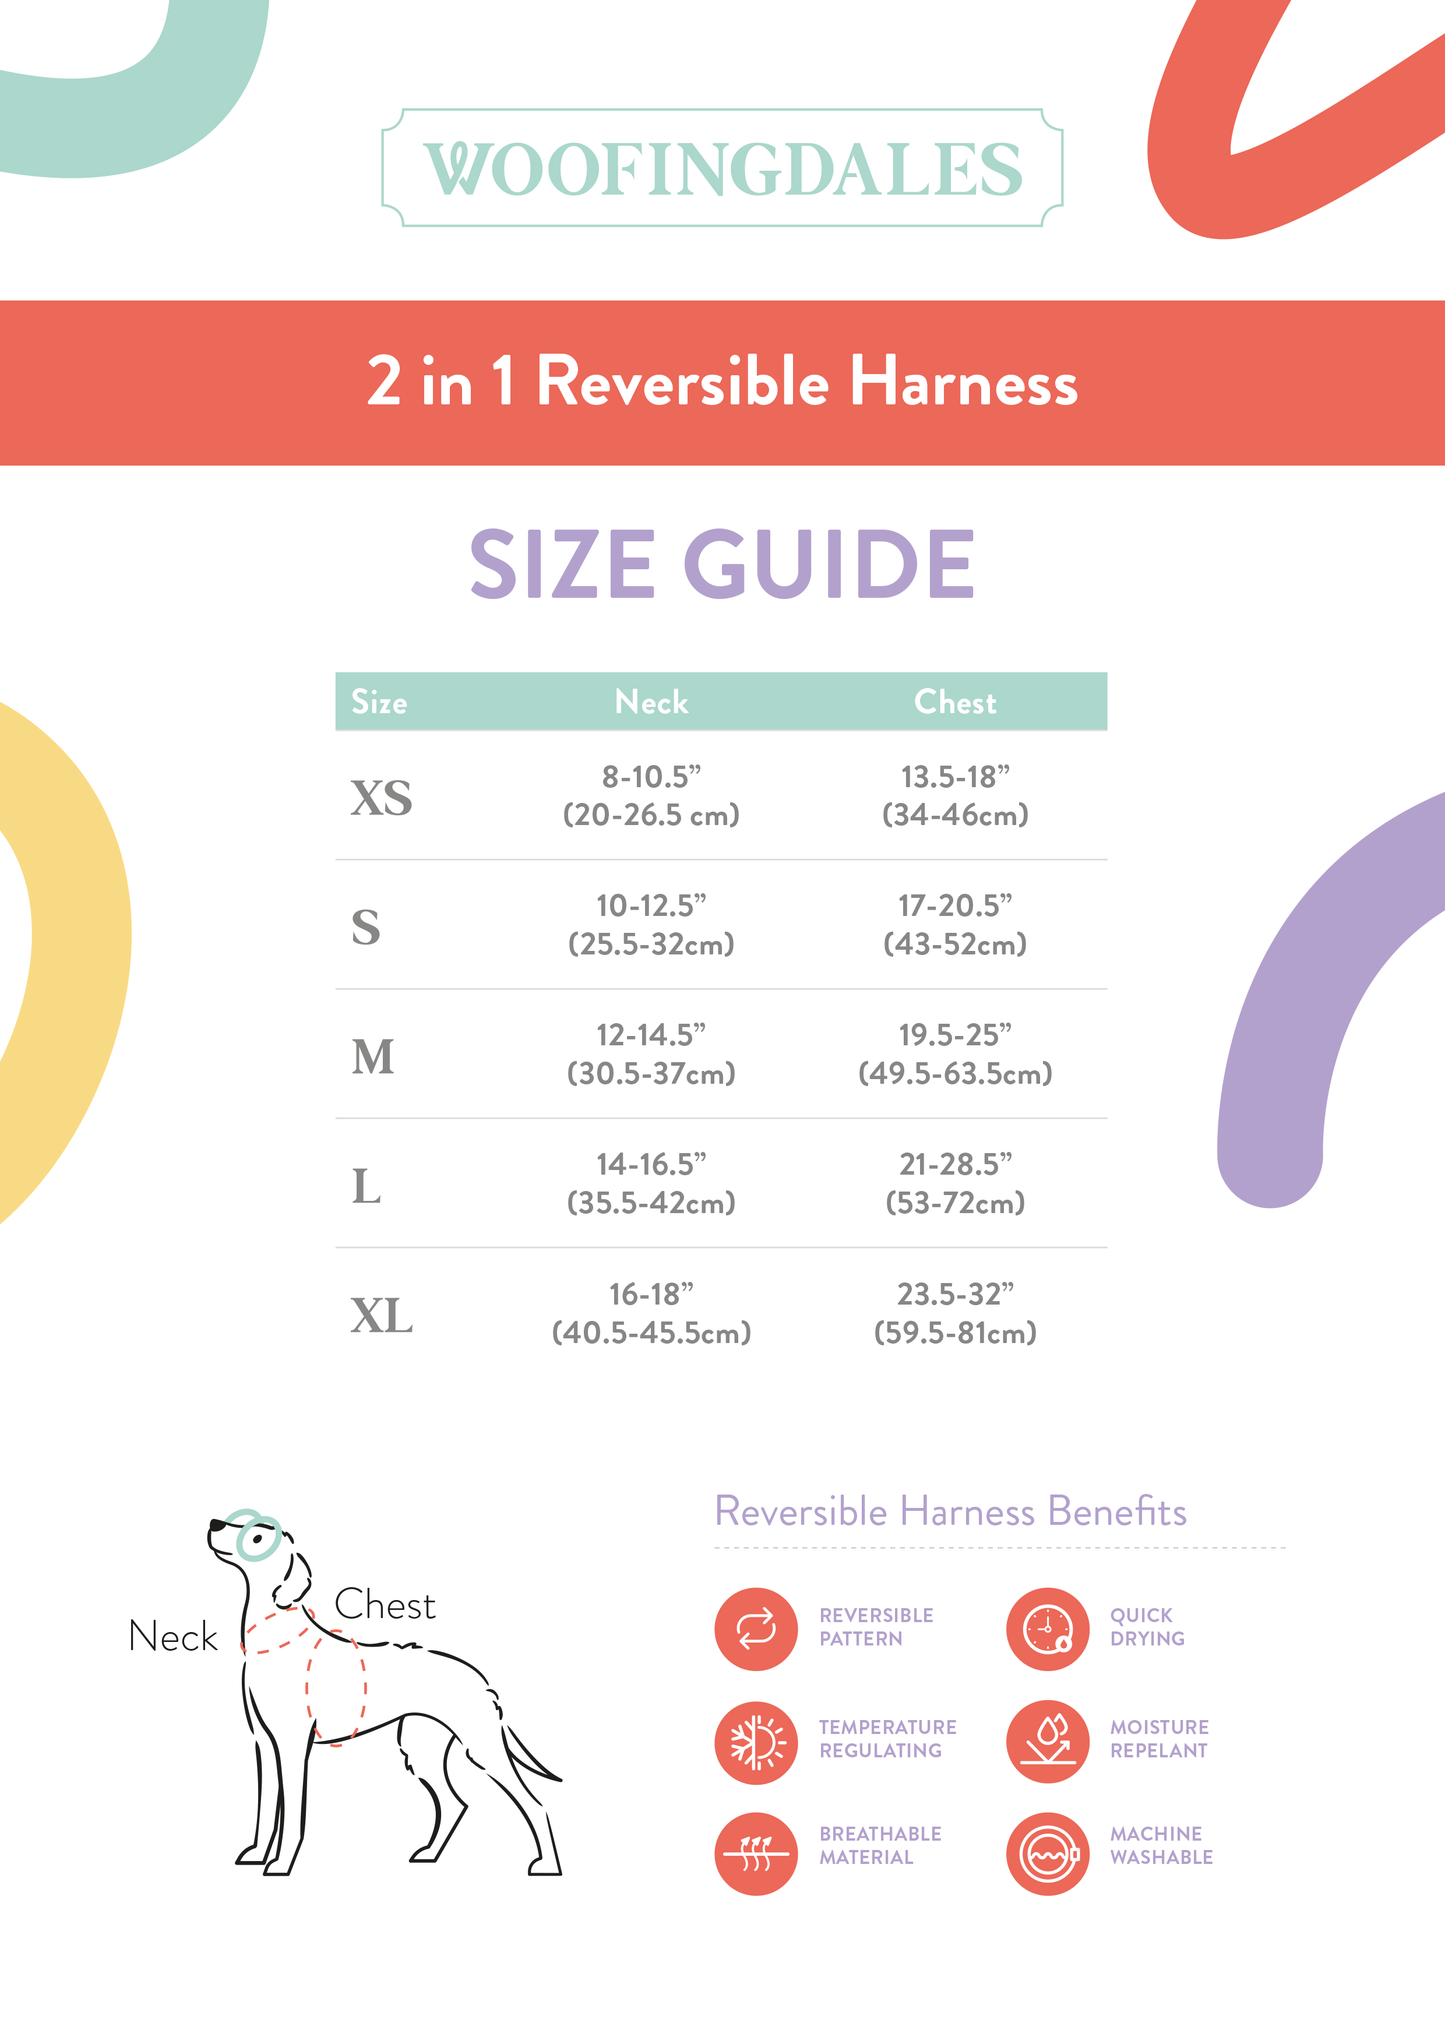 Woofingdales Poster - Size Guide for 2-in-1 reversible harness